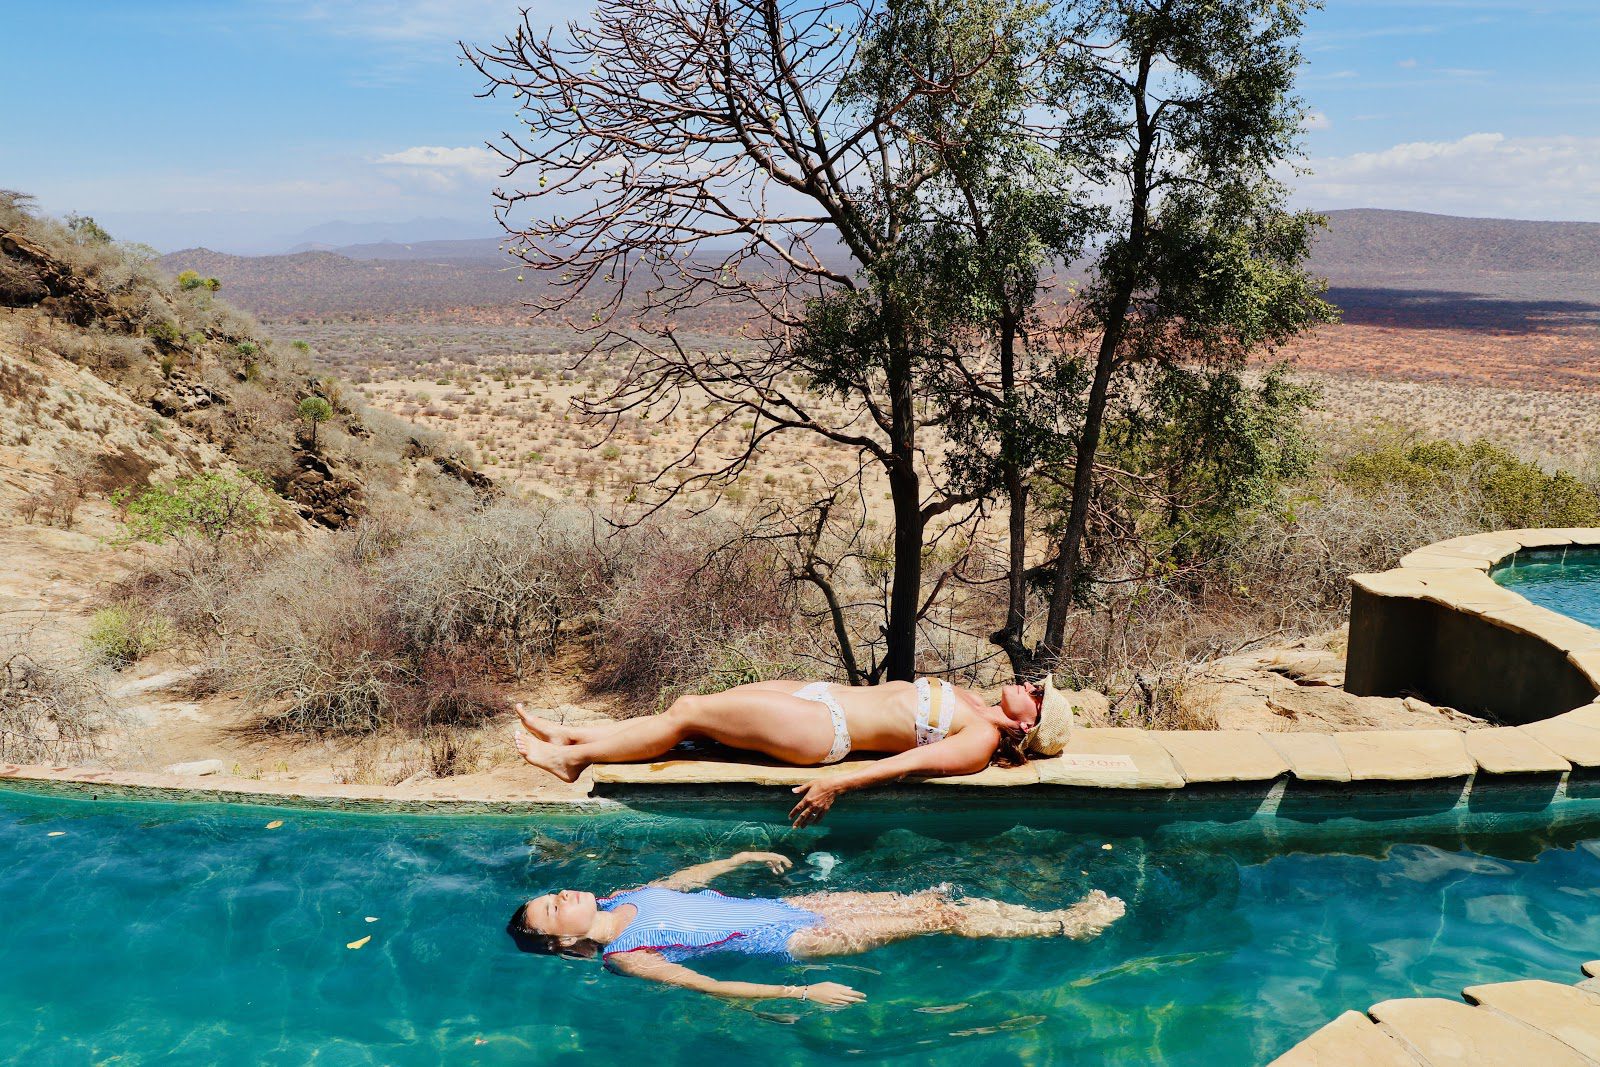 This Family's Amazing Safari Will Make You Want to Plan Your Own, Relaxing at the pool